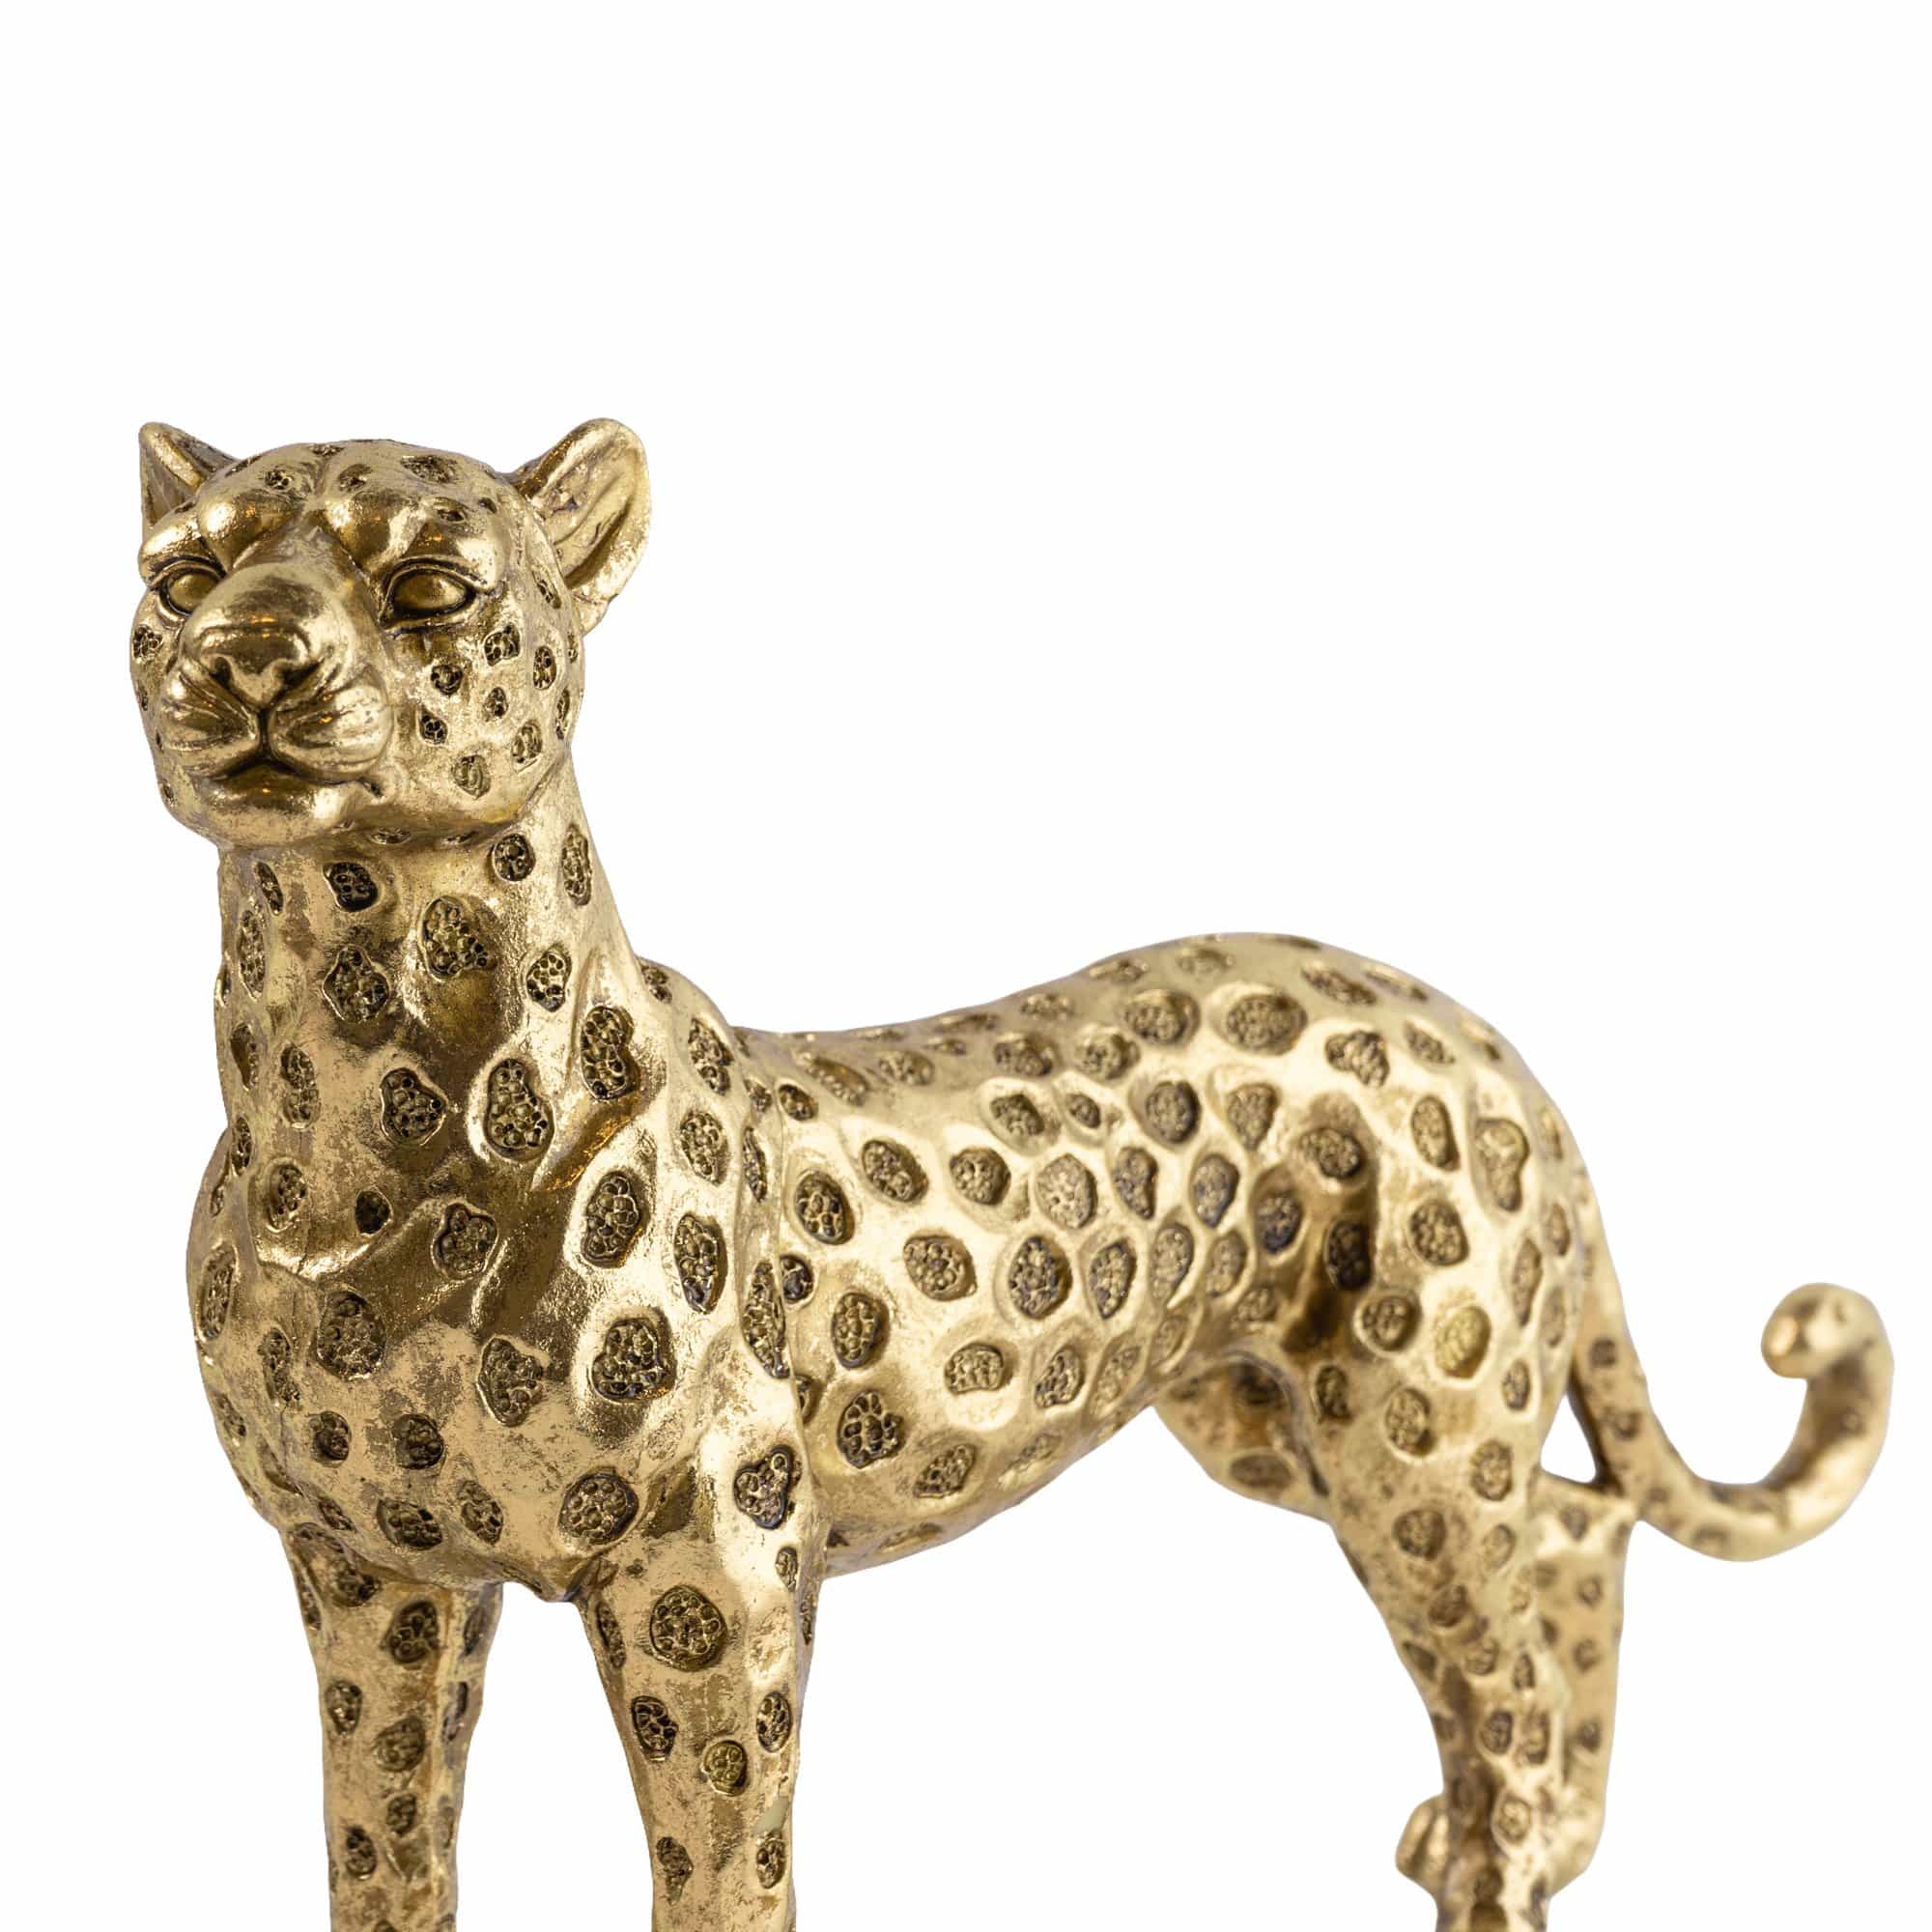 Gold Standing Resin Leopard 21cm Tall 3PK - Candlelight Home